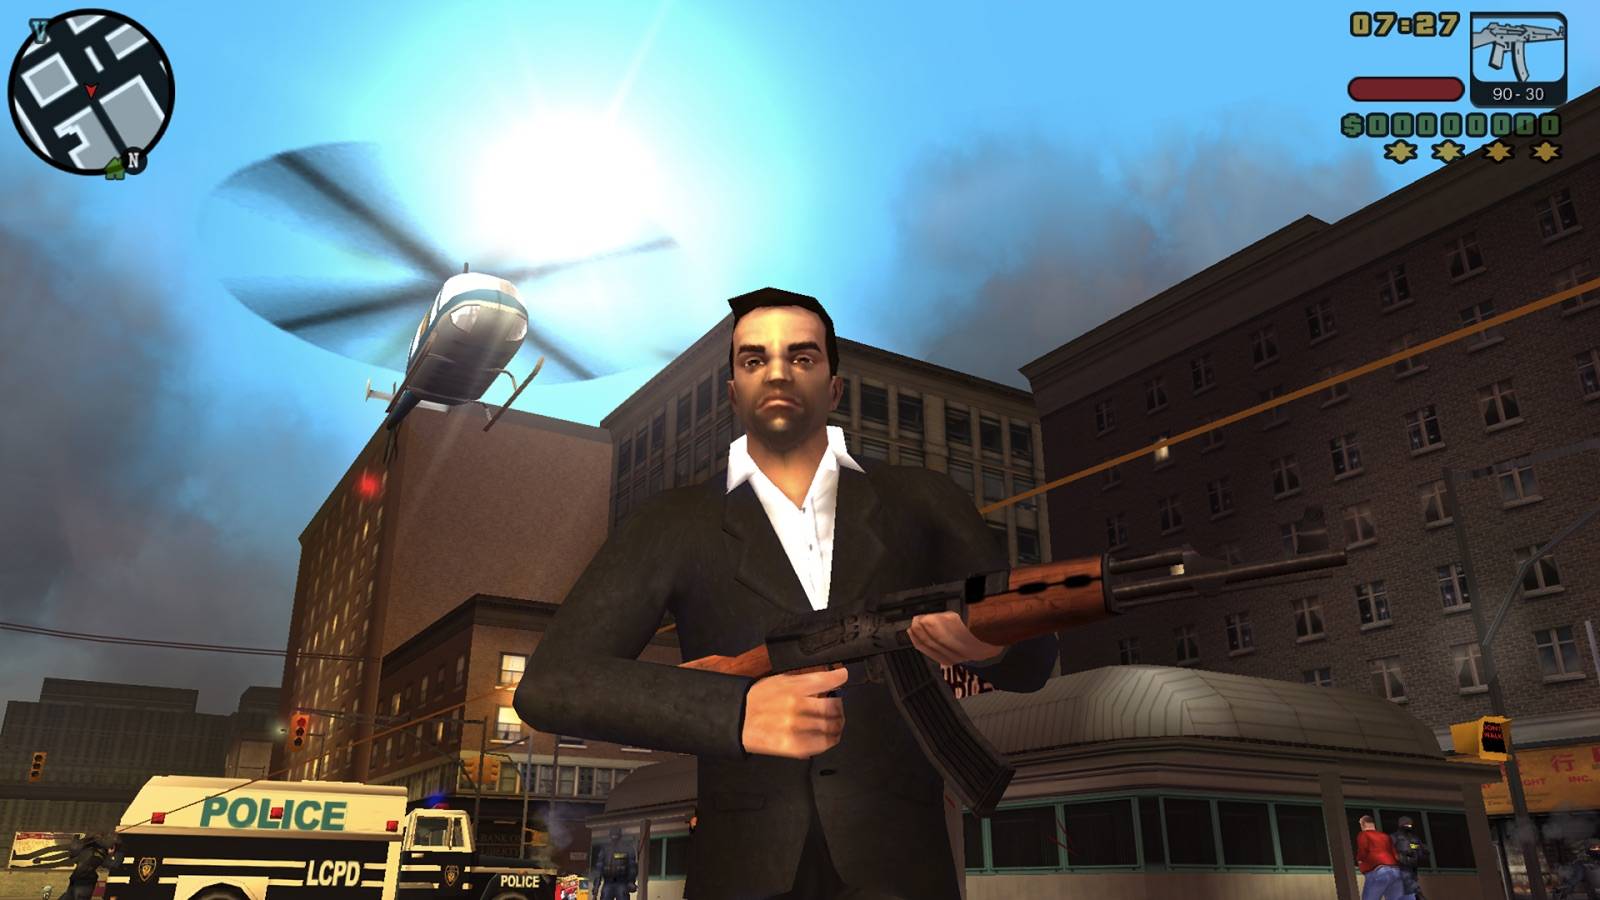 gta liberty city download for android